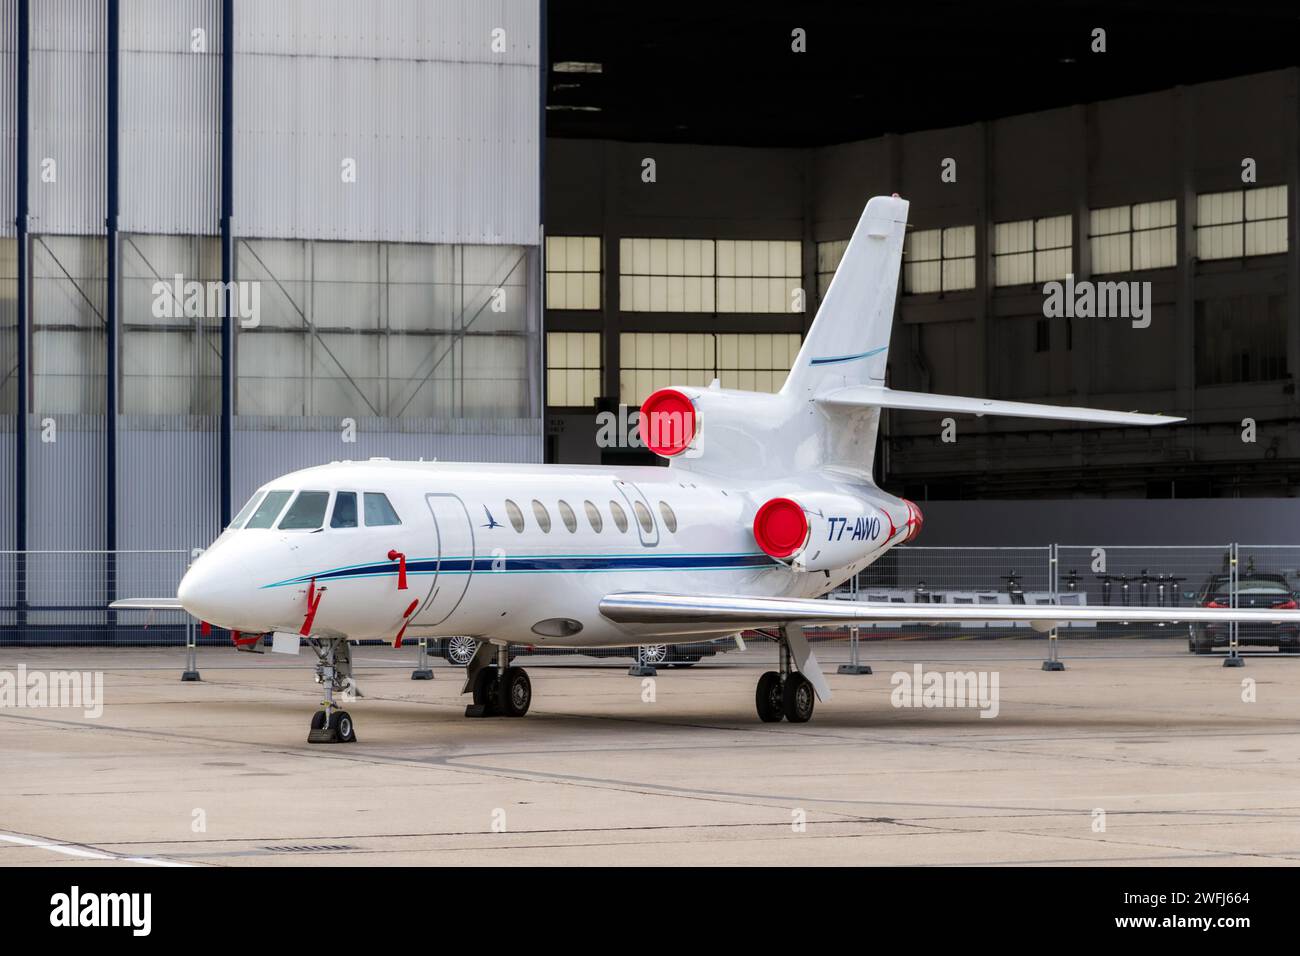 Dassault Falcon 50 business jet on the tarmac of Le Bourget Airport. Paris, France - June 23, 2017 Stock Photo